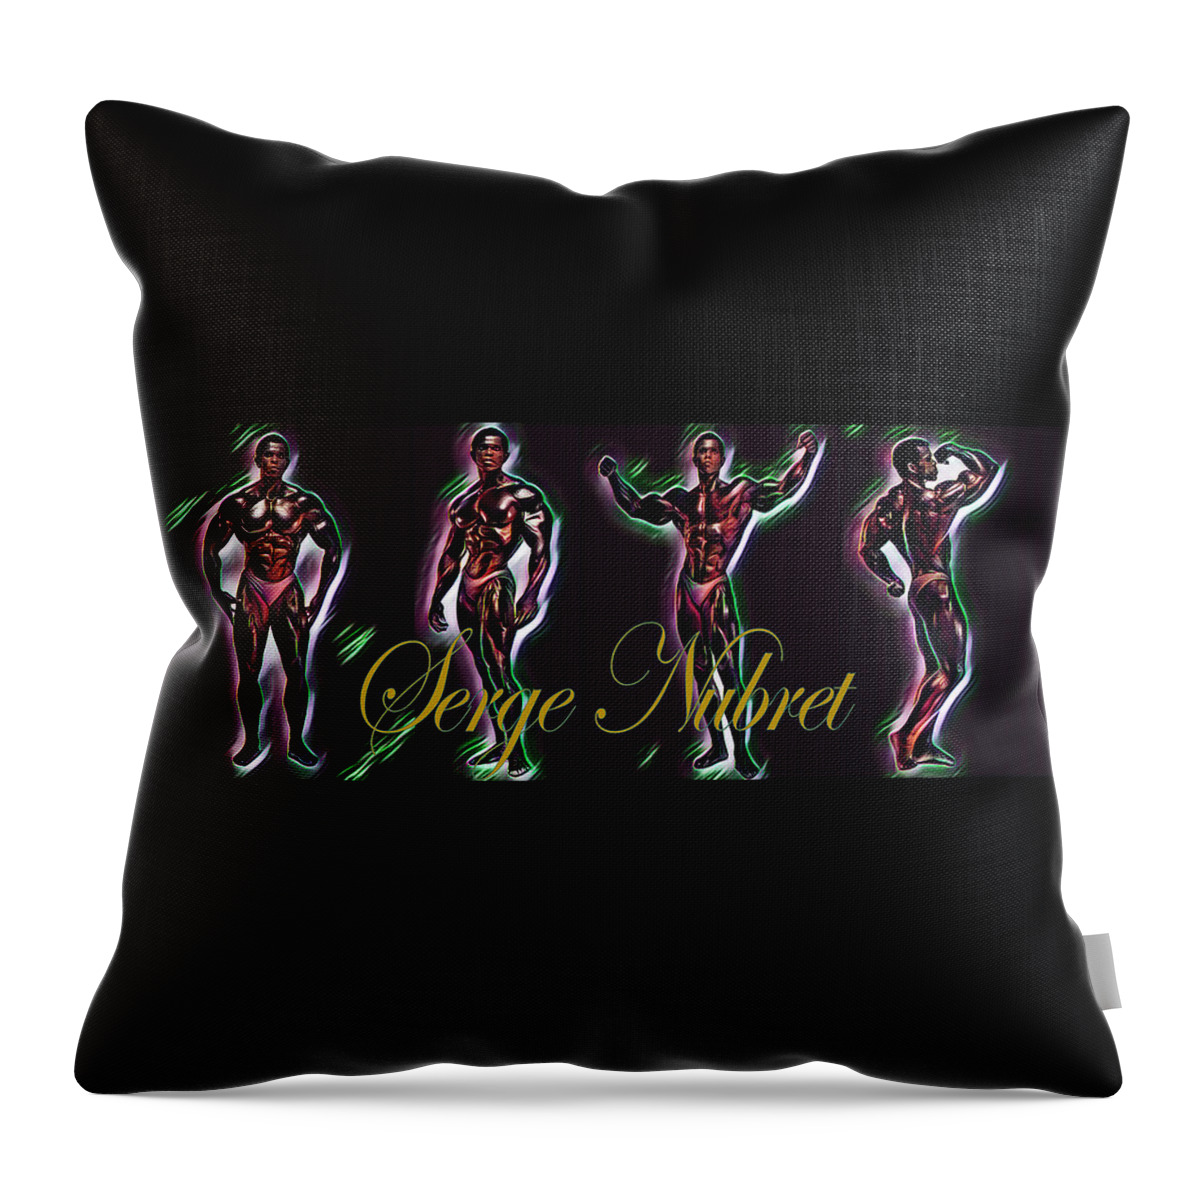 Idol Throw Pillow featuring the photograph Serge Nubret by Theodore Jones